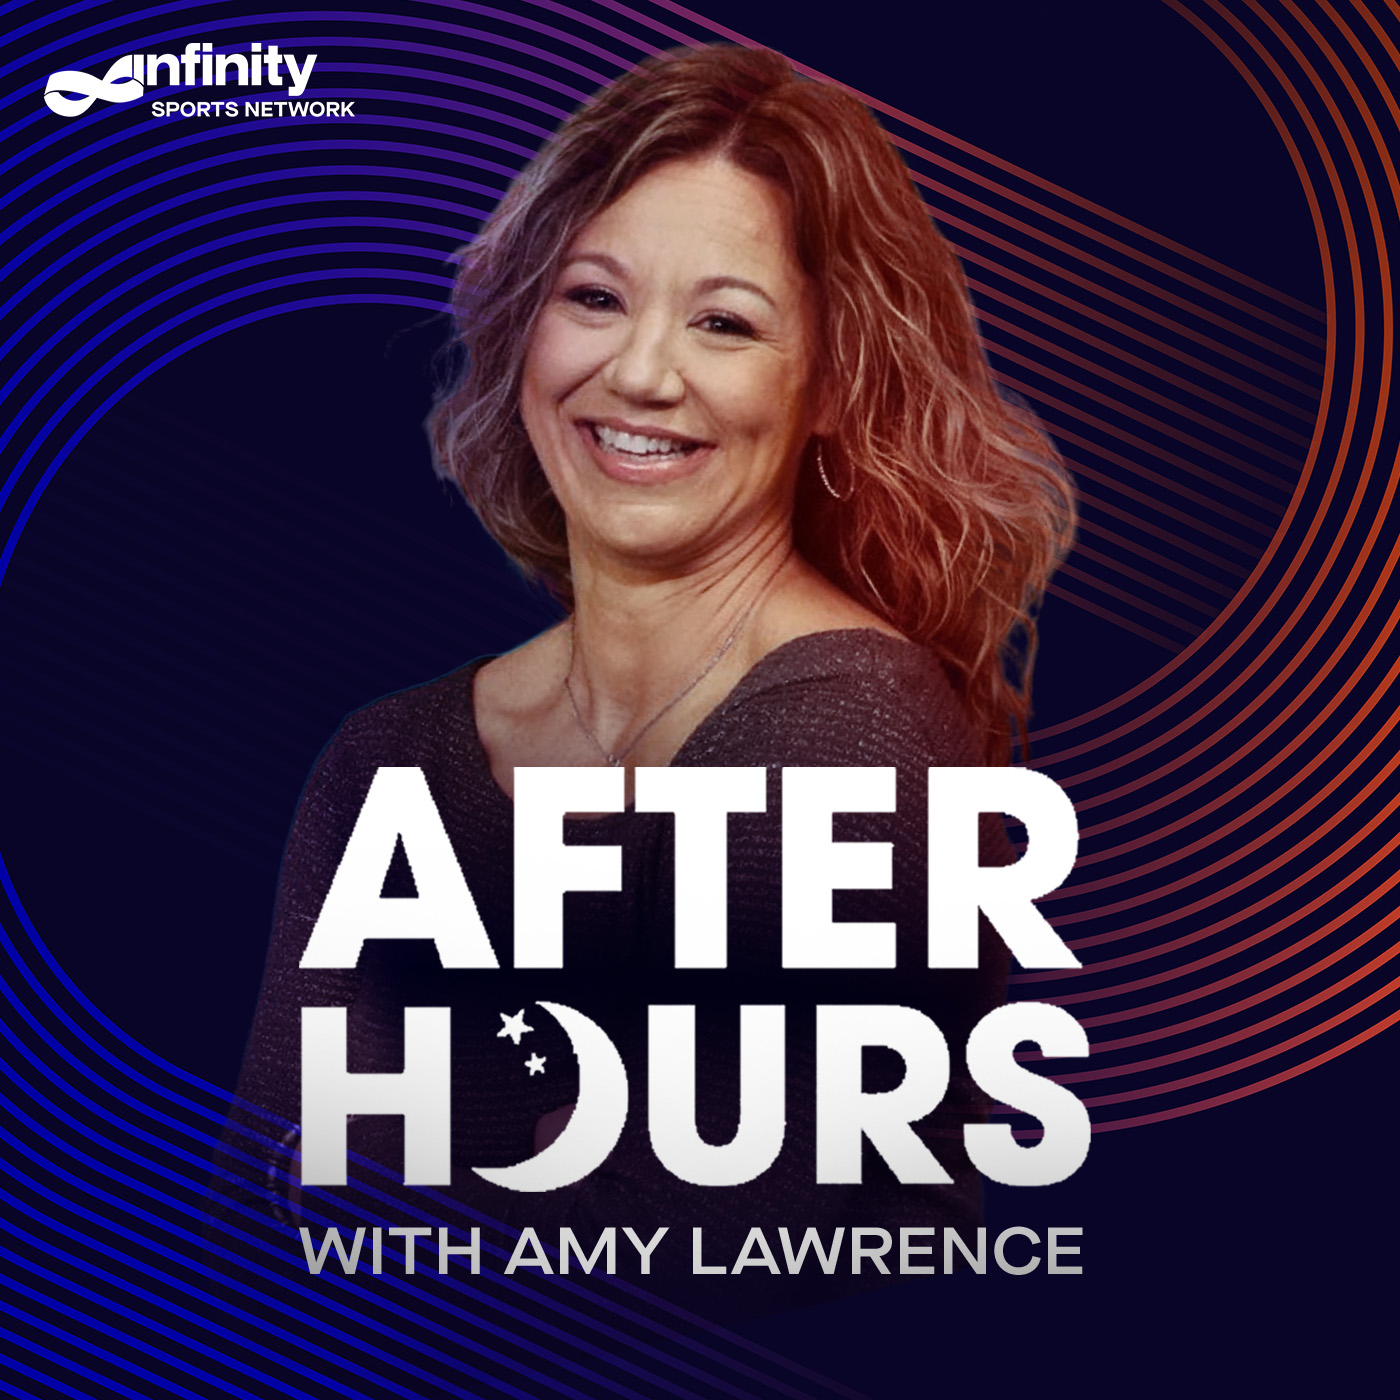 4/13/21 After Hours with Amy Lawrence PODCAST: Hour 1